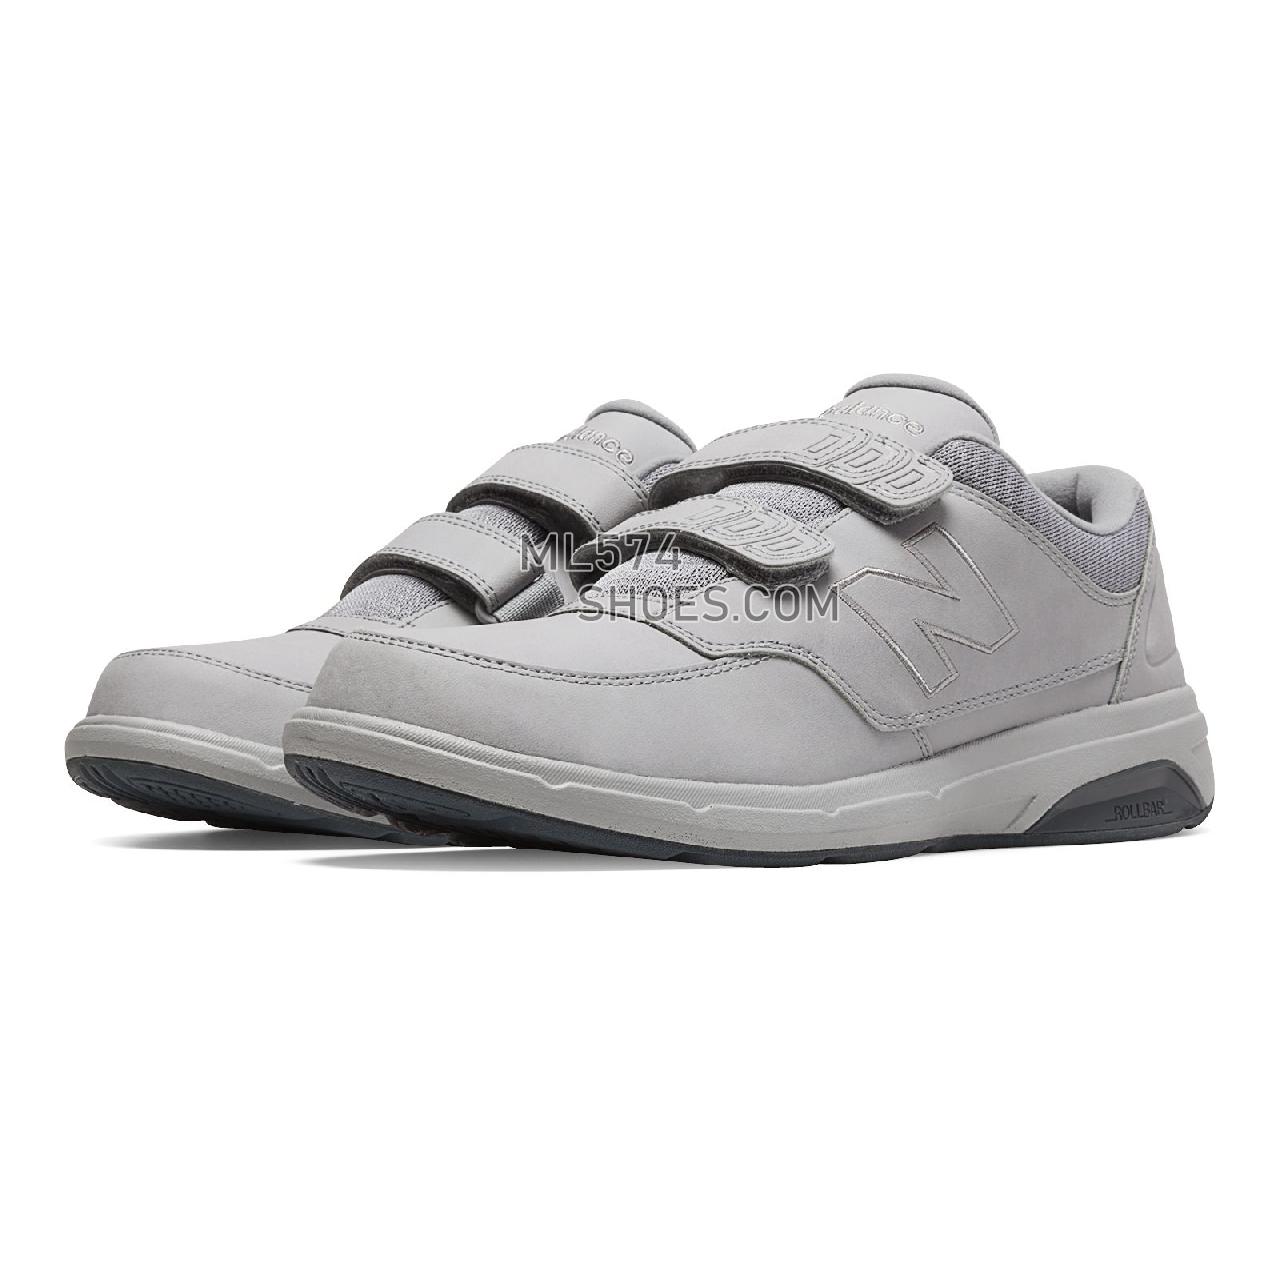 New Balance Men's Hook and Loop 813 - Men's 813 - Walking Silver Mink with Lead - MW813HGY